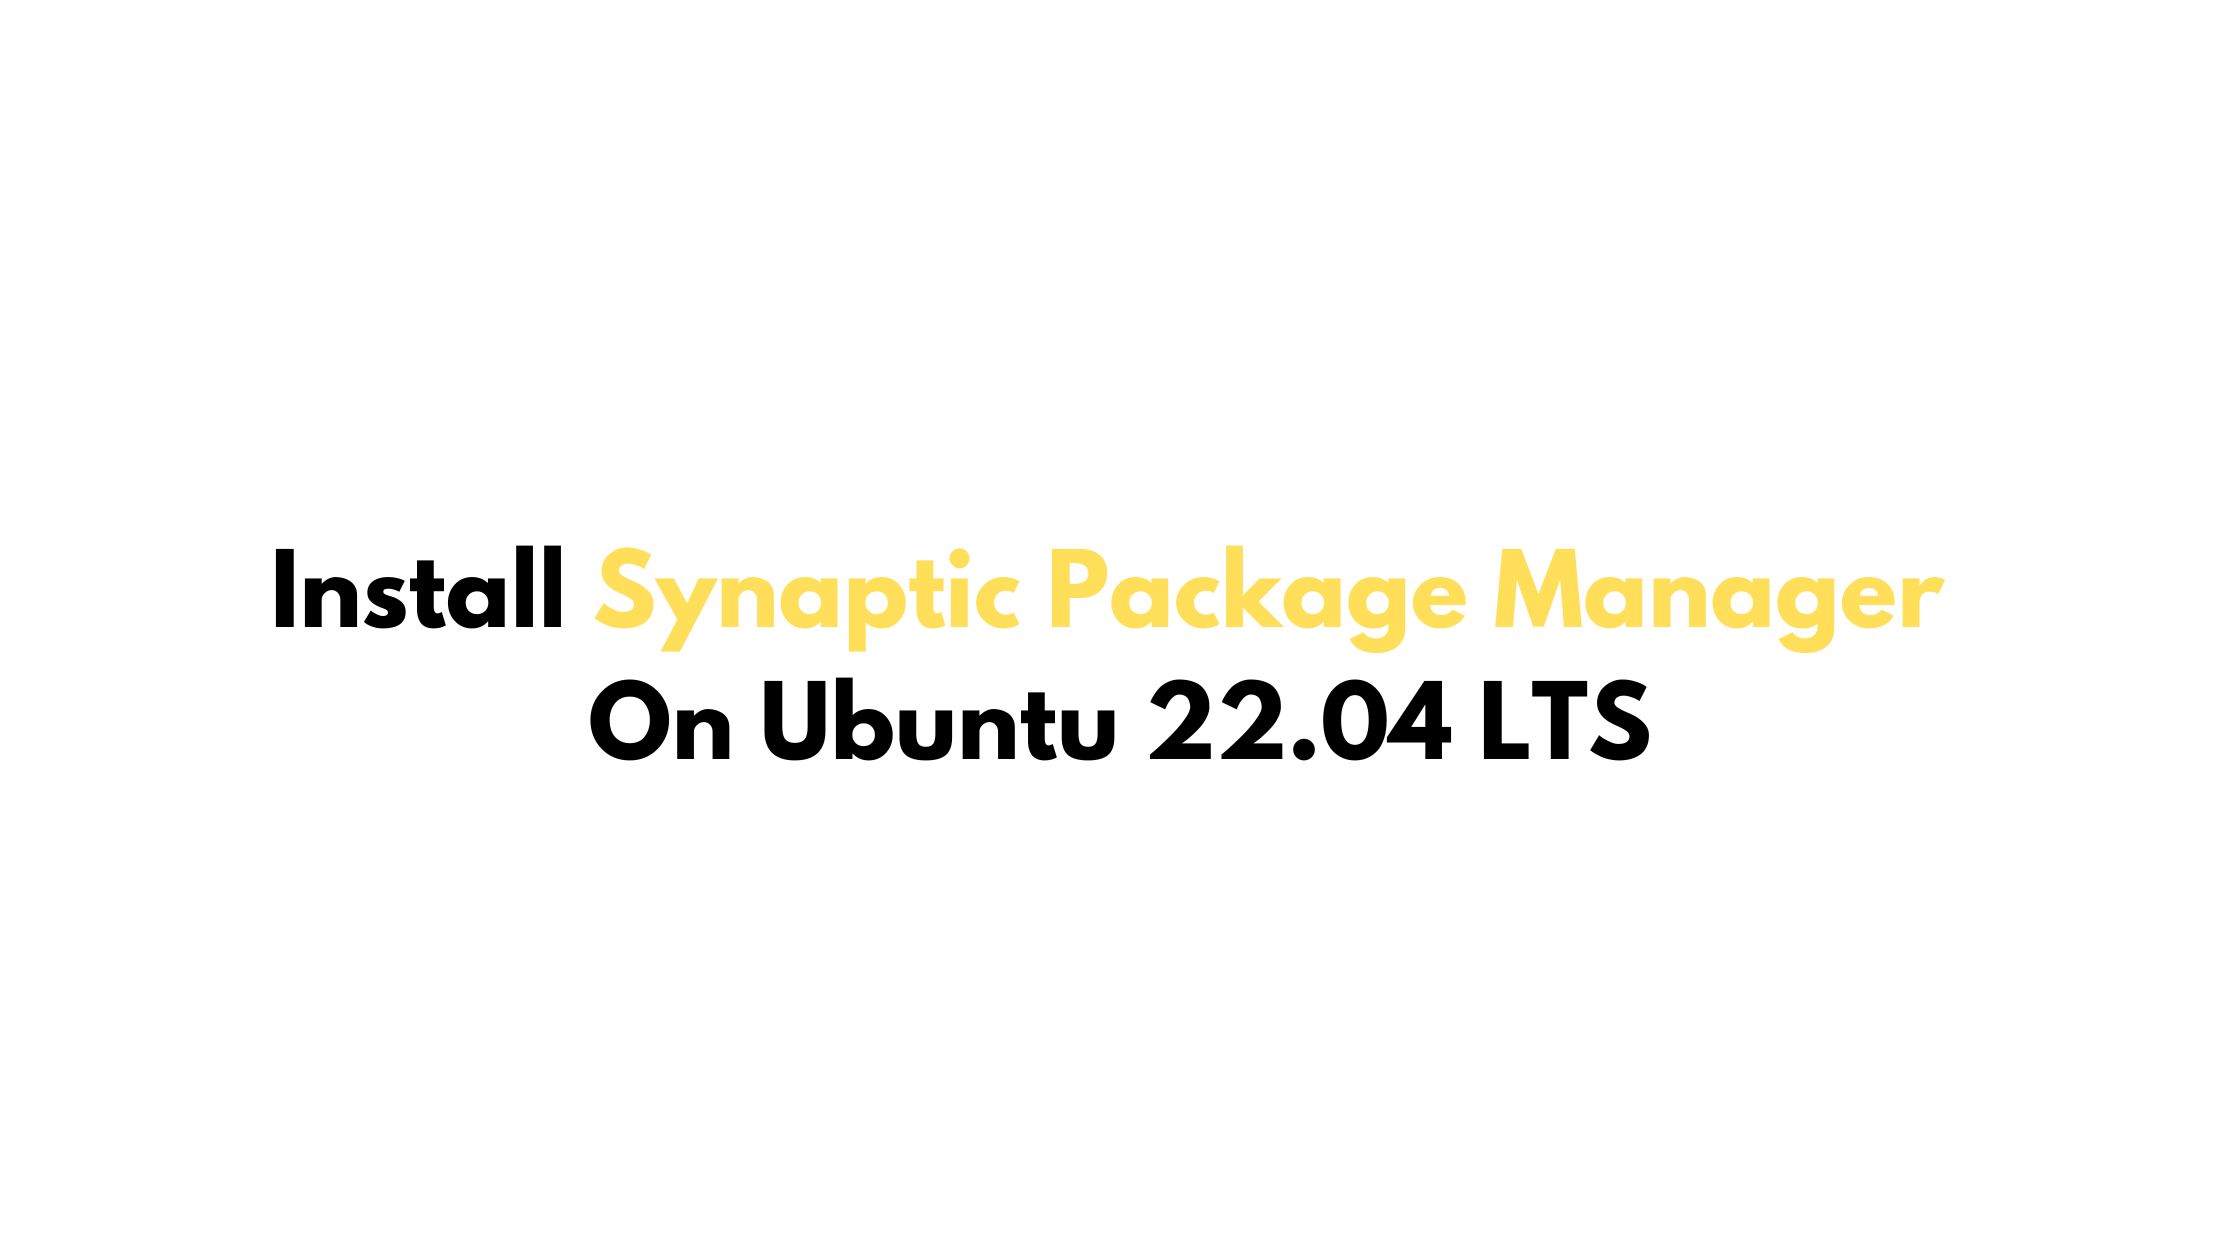 Install Synaptic Package Manager On Ubuntu 22.04 LTS